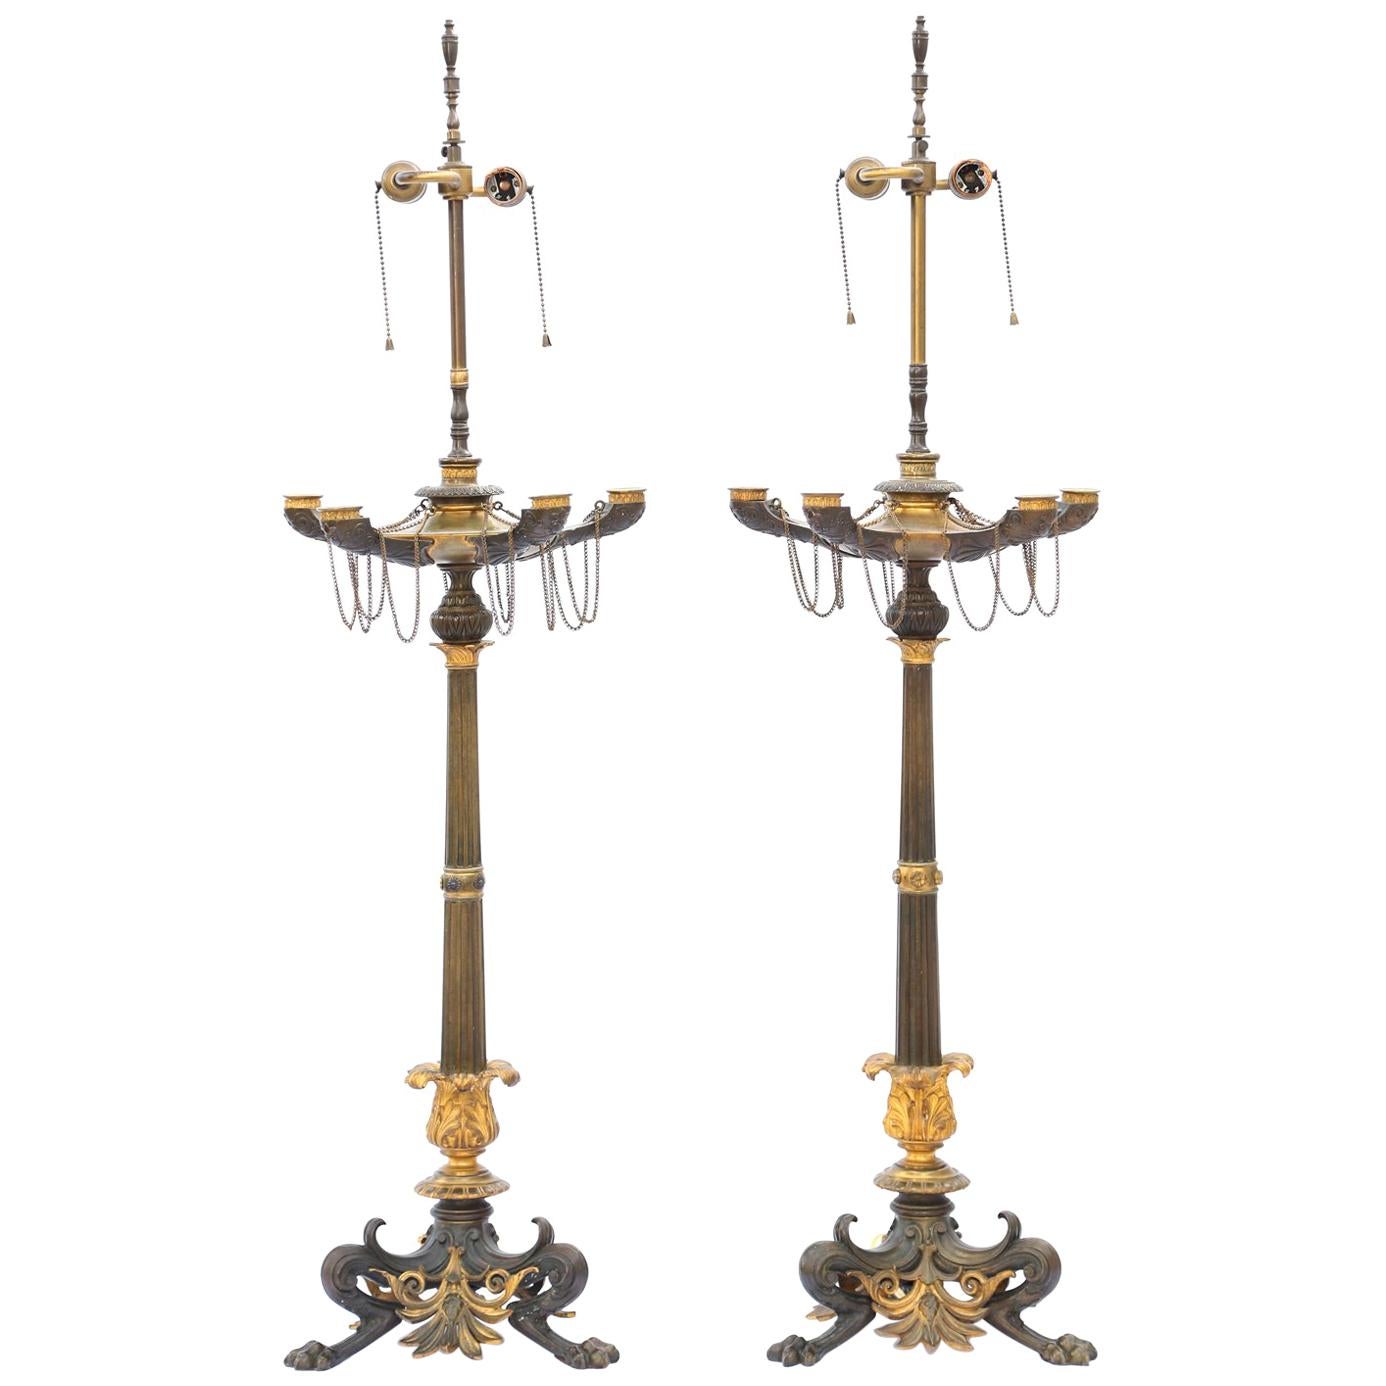 Pair of Regency Patinated Bronze and Ormolu Candelabra Lamps